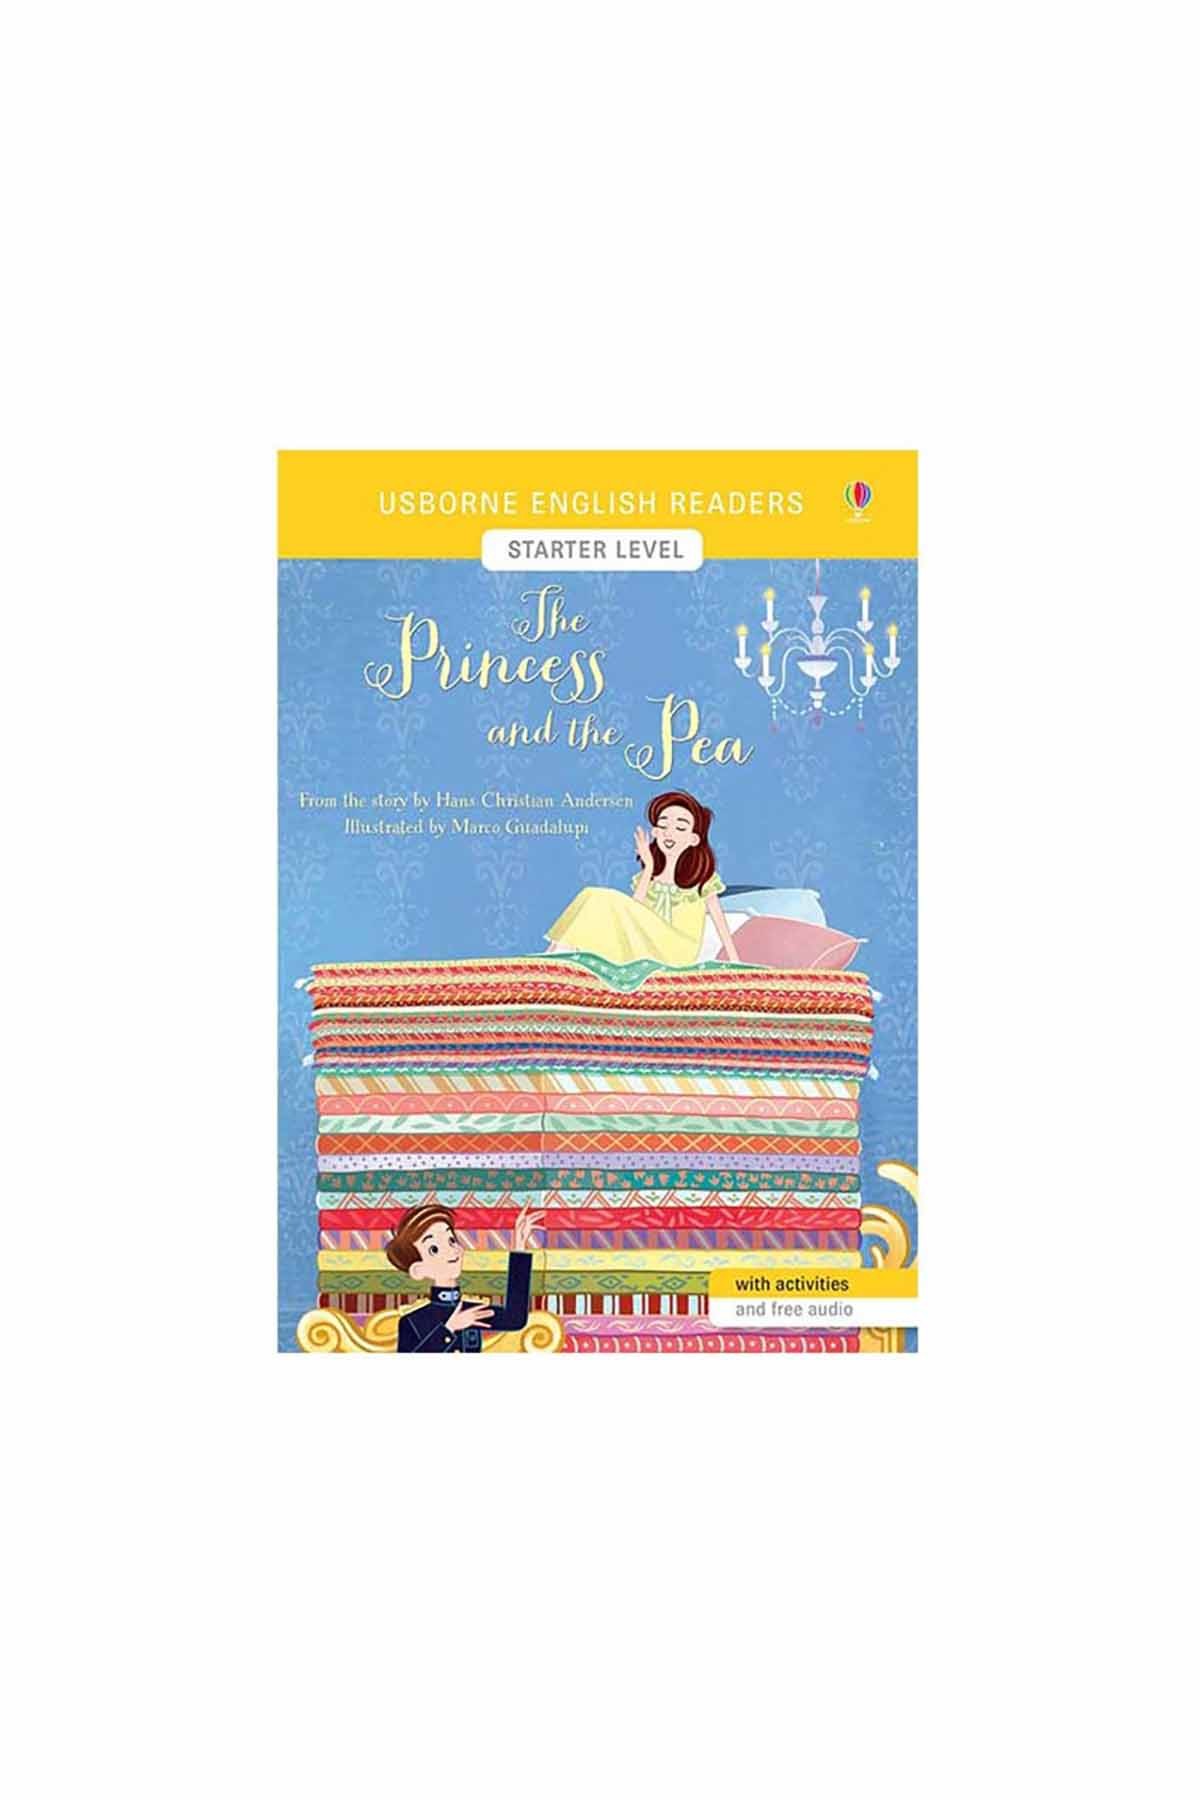 The Usborne The Princess and the Pea - English Readers Starter Level